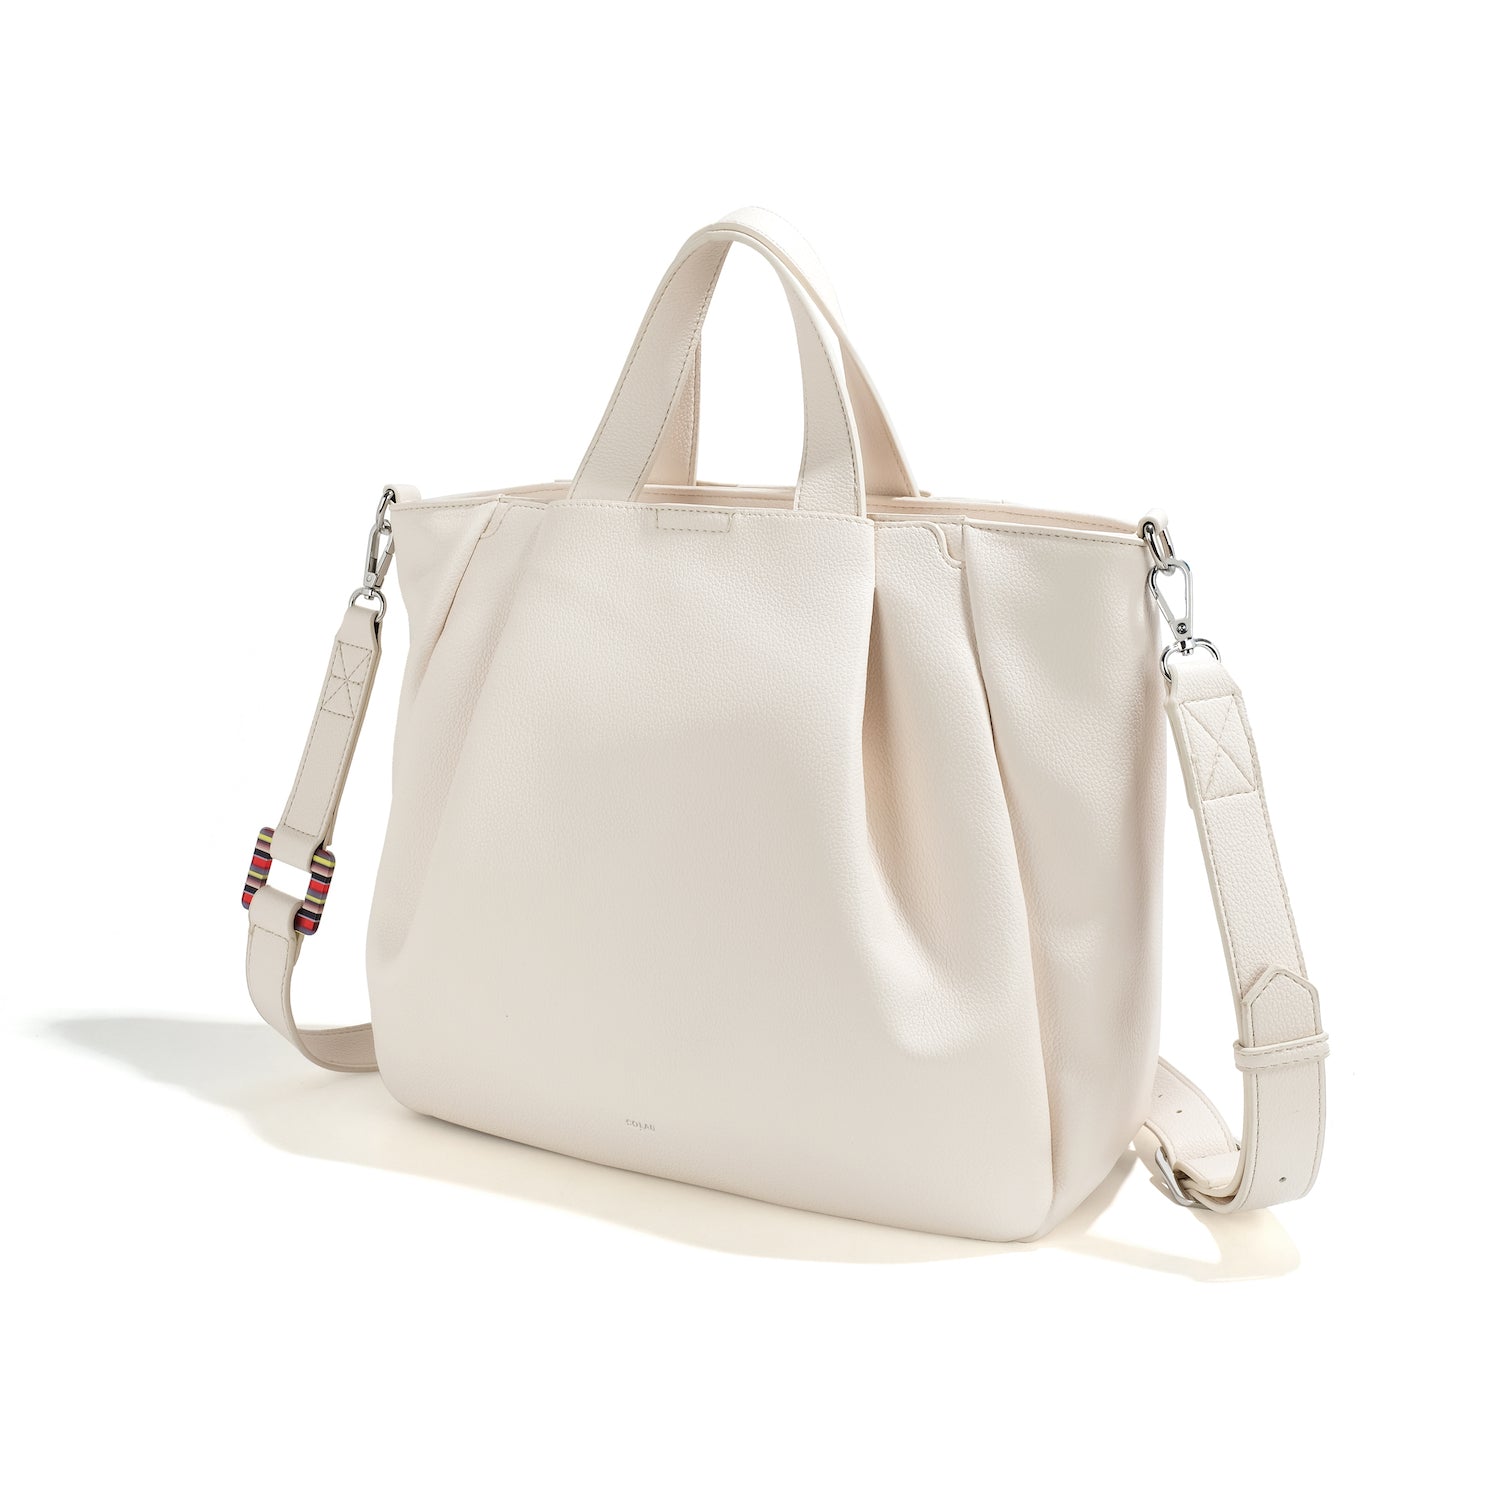 co-lab Port Crossbody Bag - Cream Accessories - Other Accessories - Handbags & Wallets by co-lab | Grace the Boutique